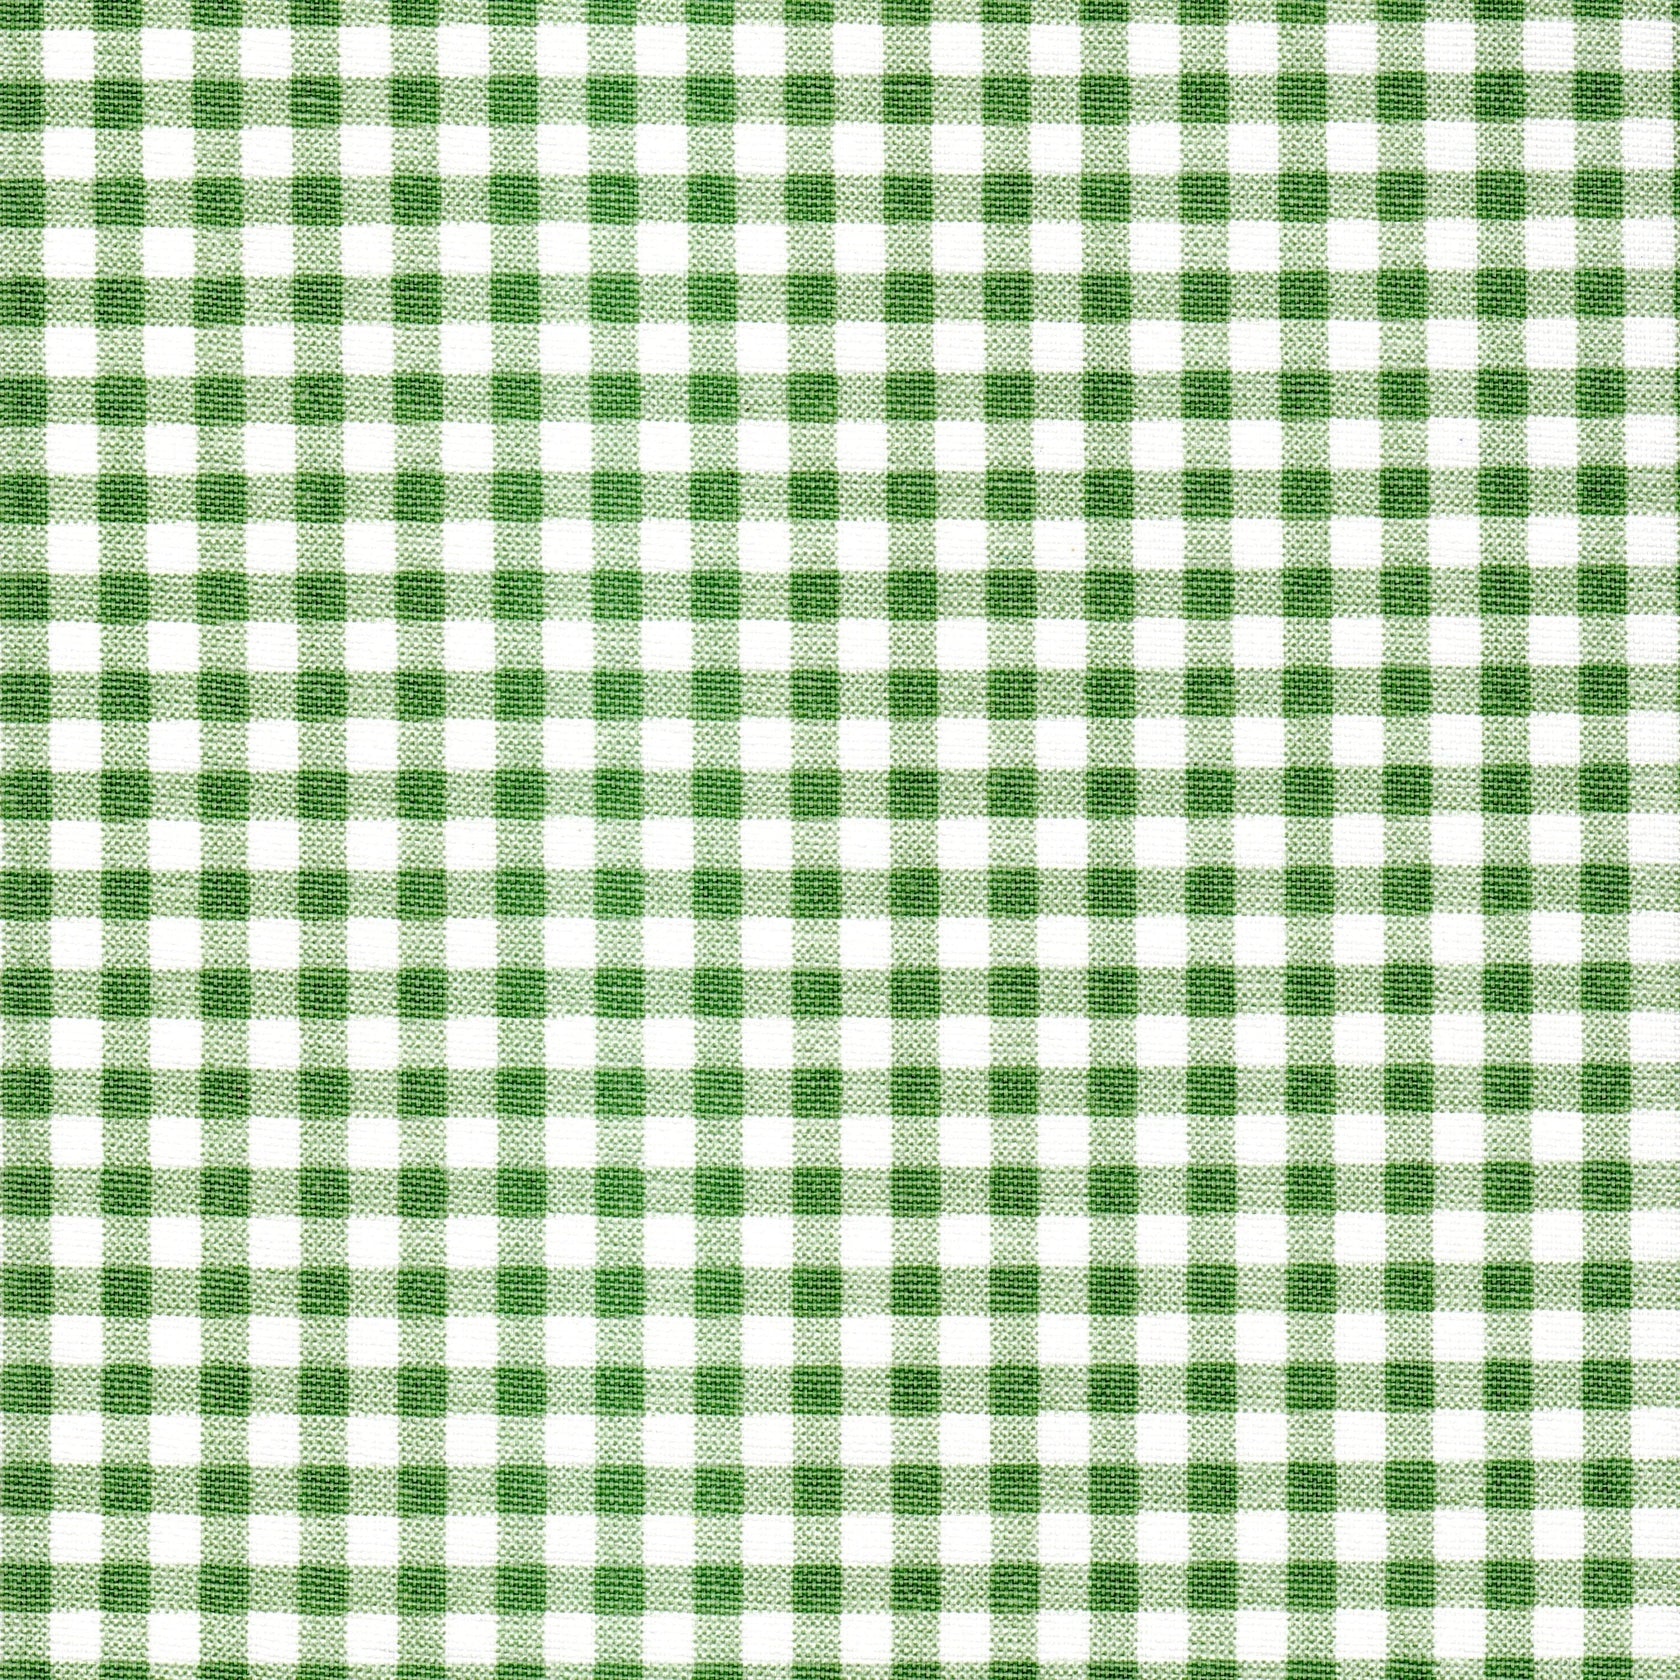 Tailored Crib Skirt in Sage Green Large Gingham Check on White Plaid